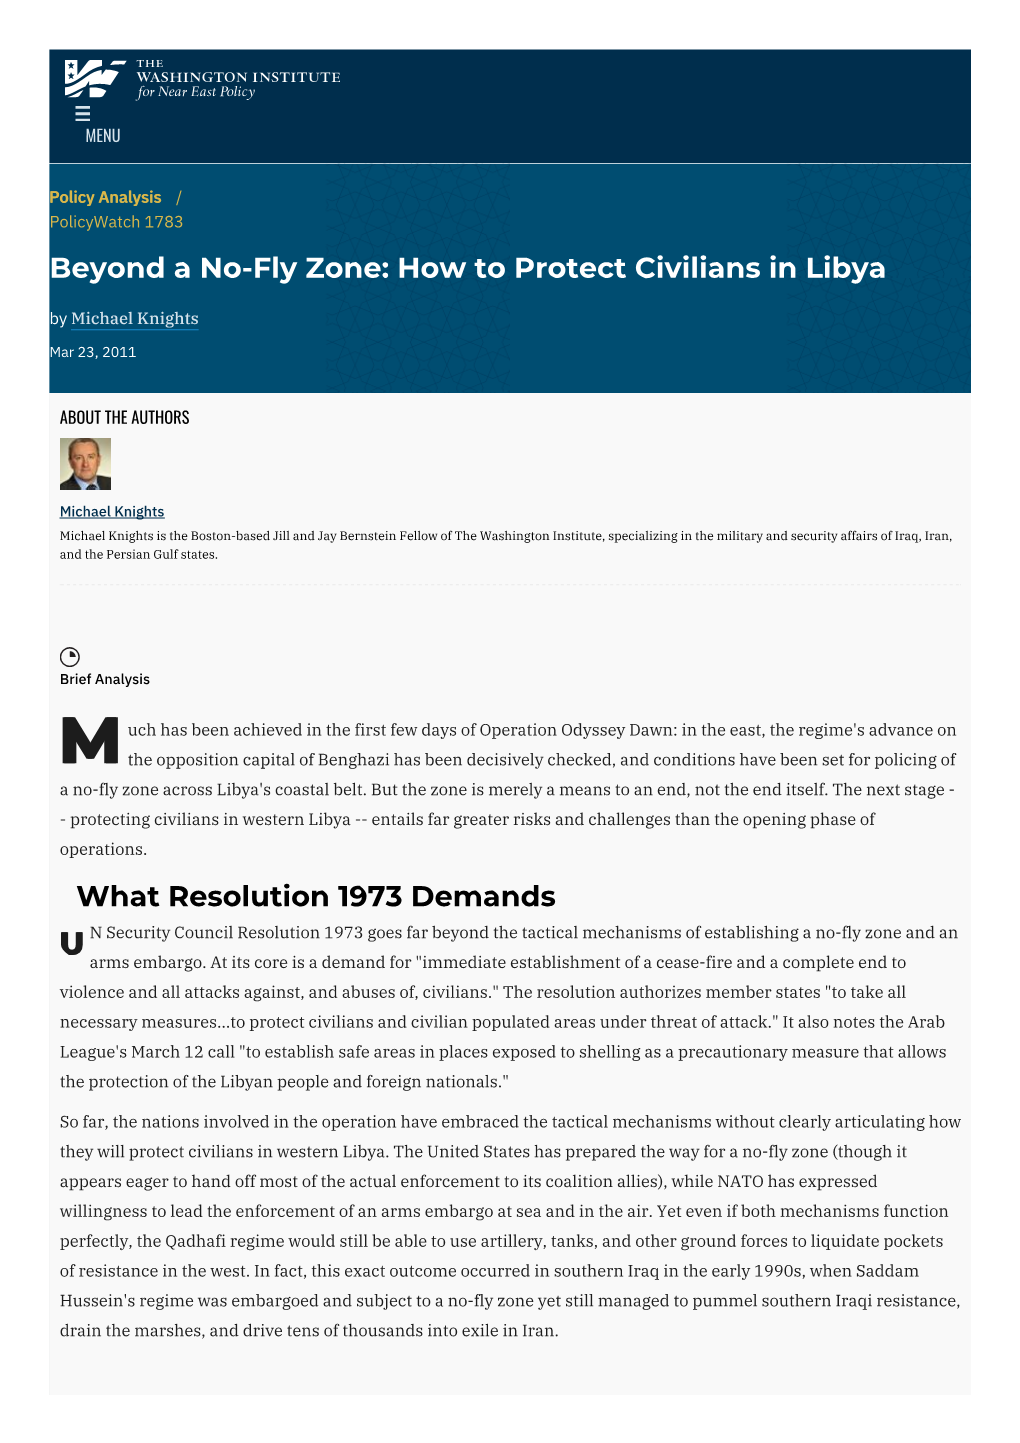 How to Protect Civilians in Libya by Michael Knights